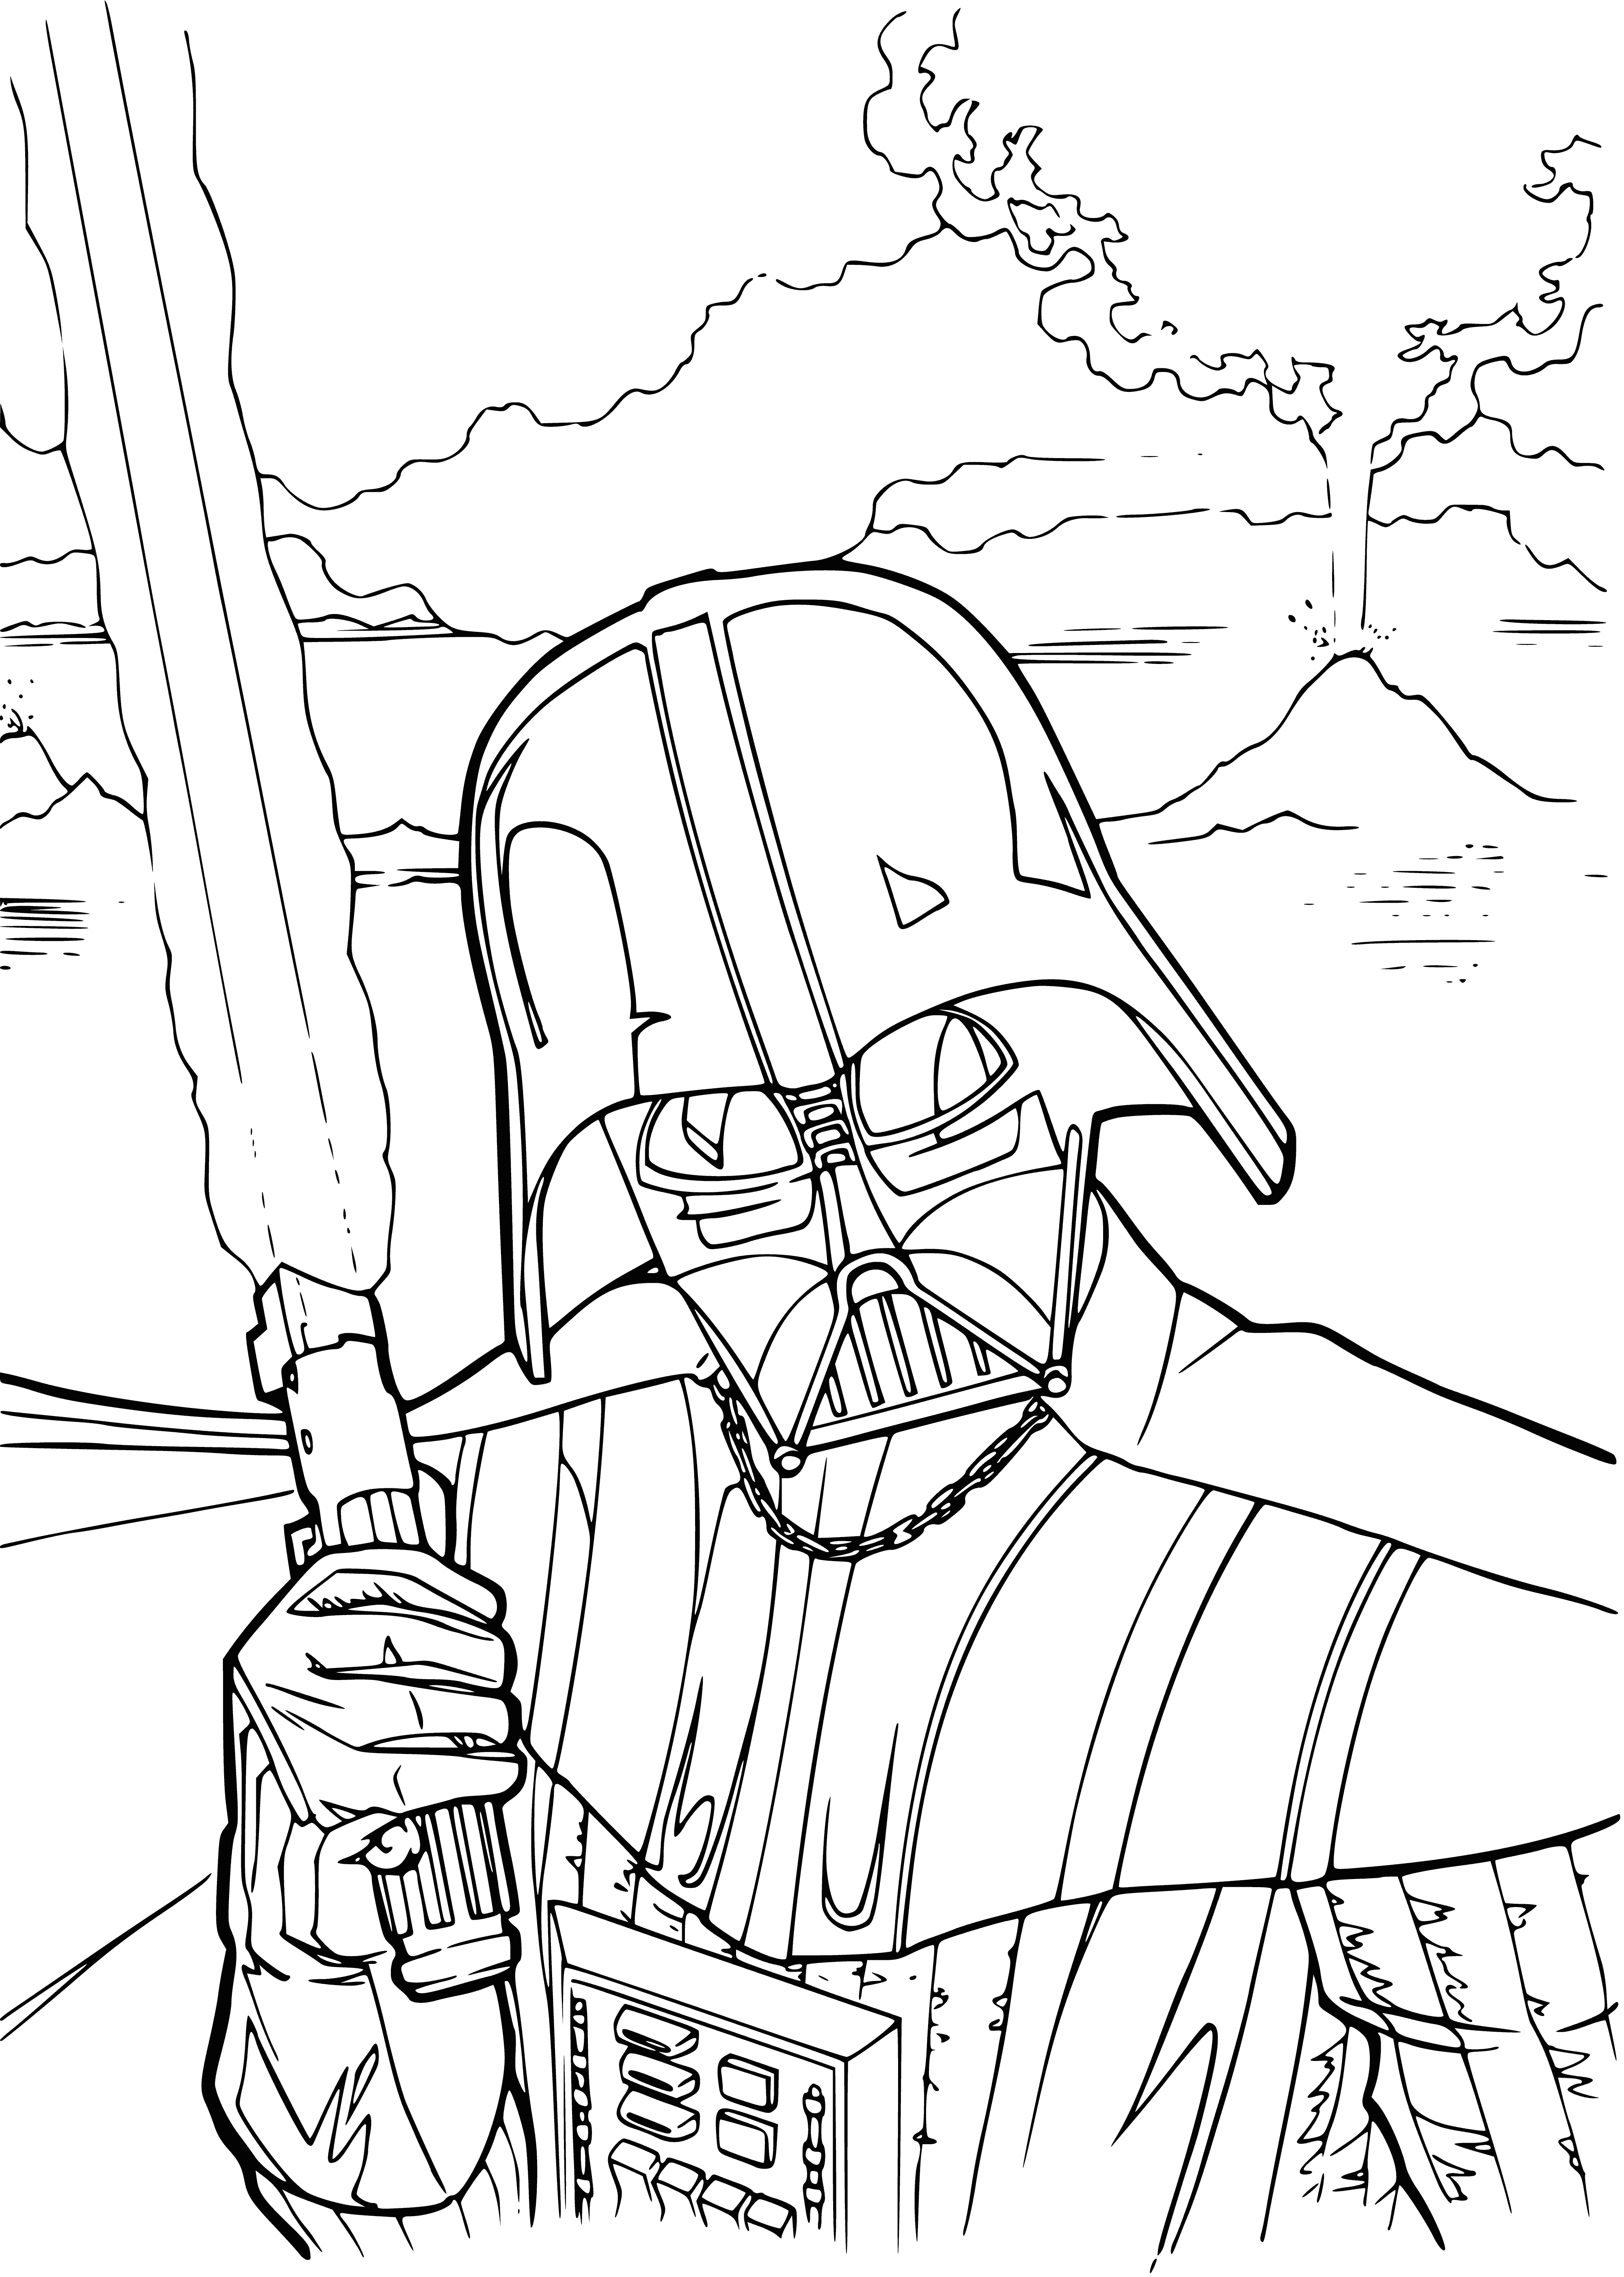 coloring page: Darth Vader, Lord Sith in all black with a long cape, stands on a balcony with crossed arms, helmet tilted, and a serious and menacing expression.